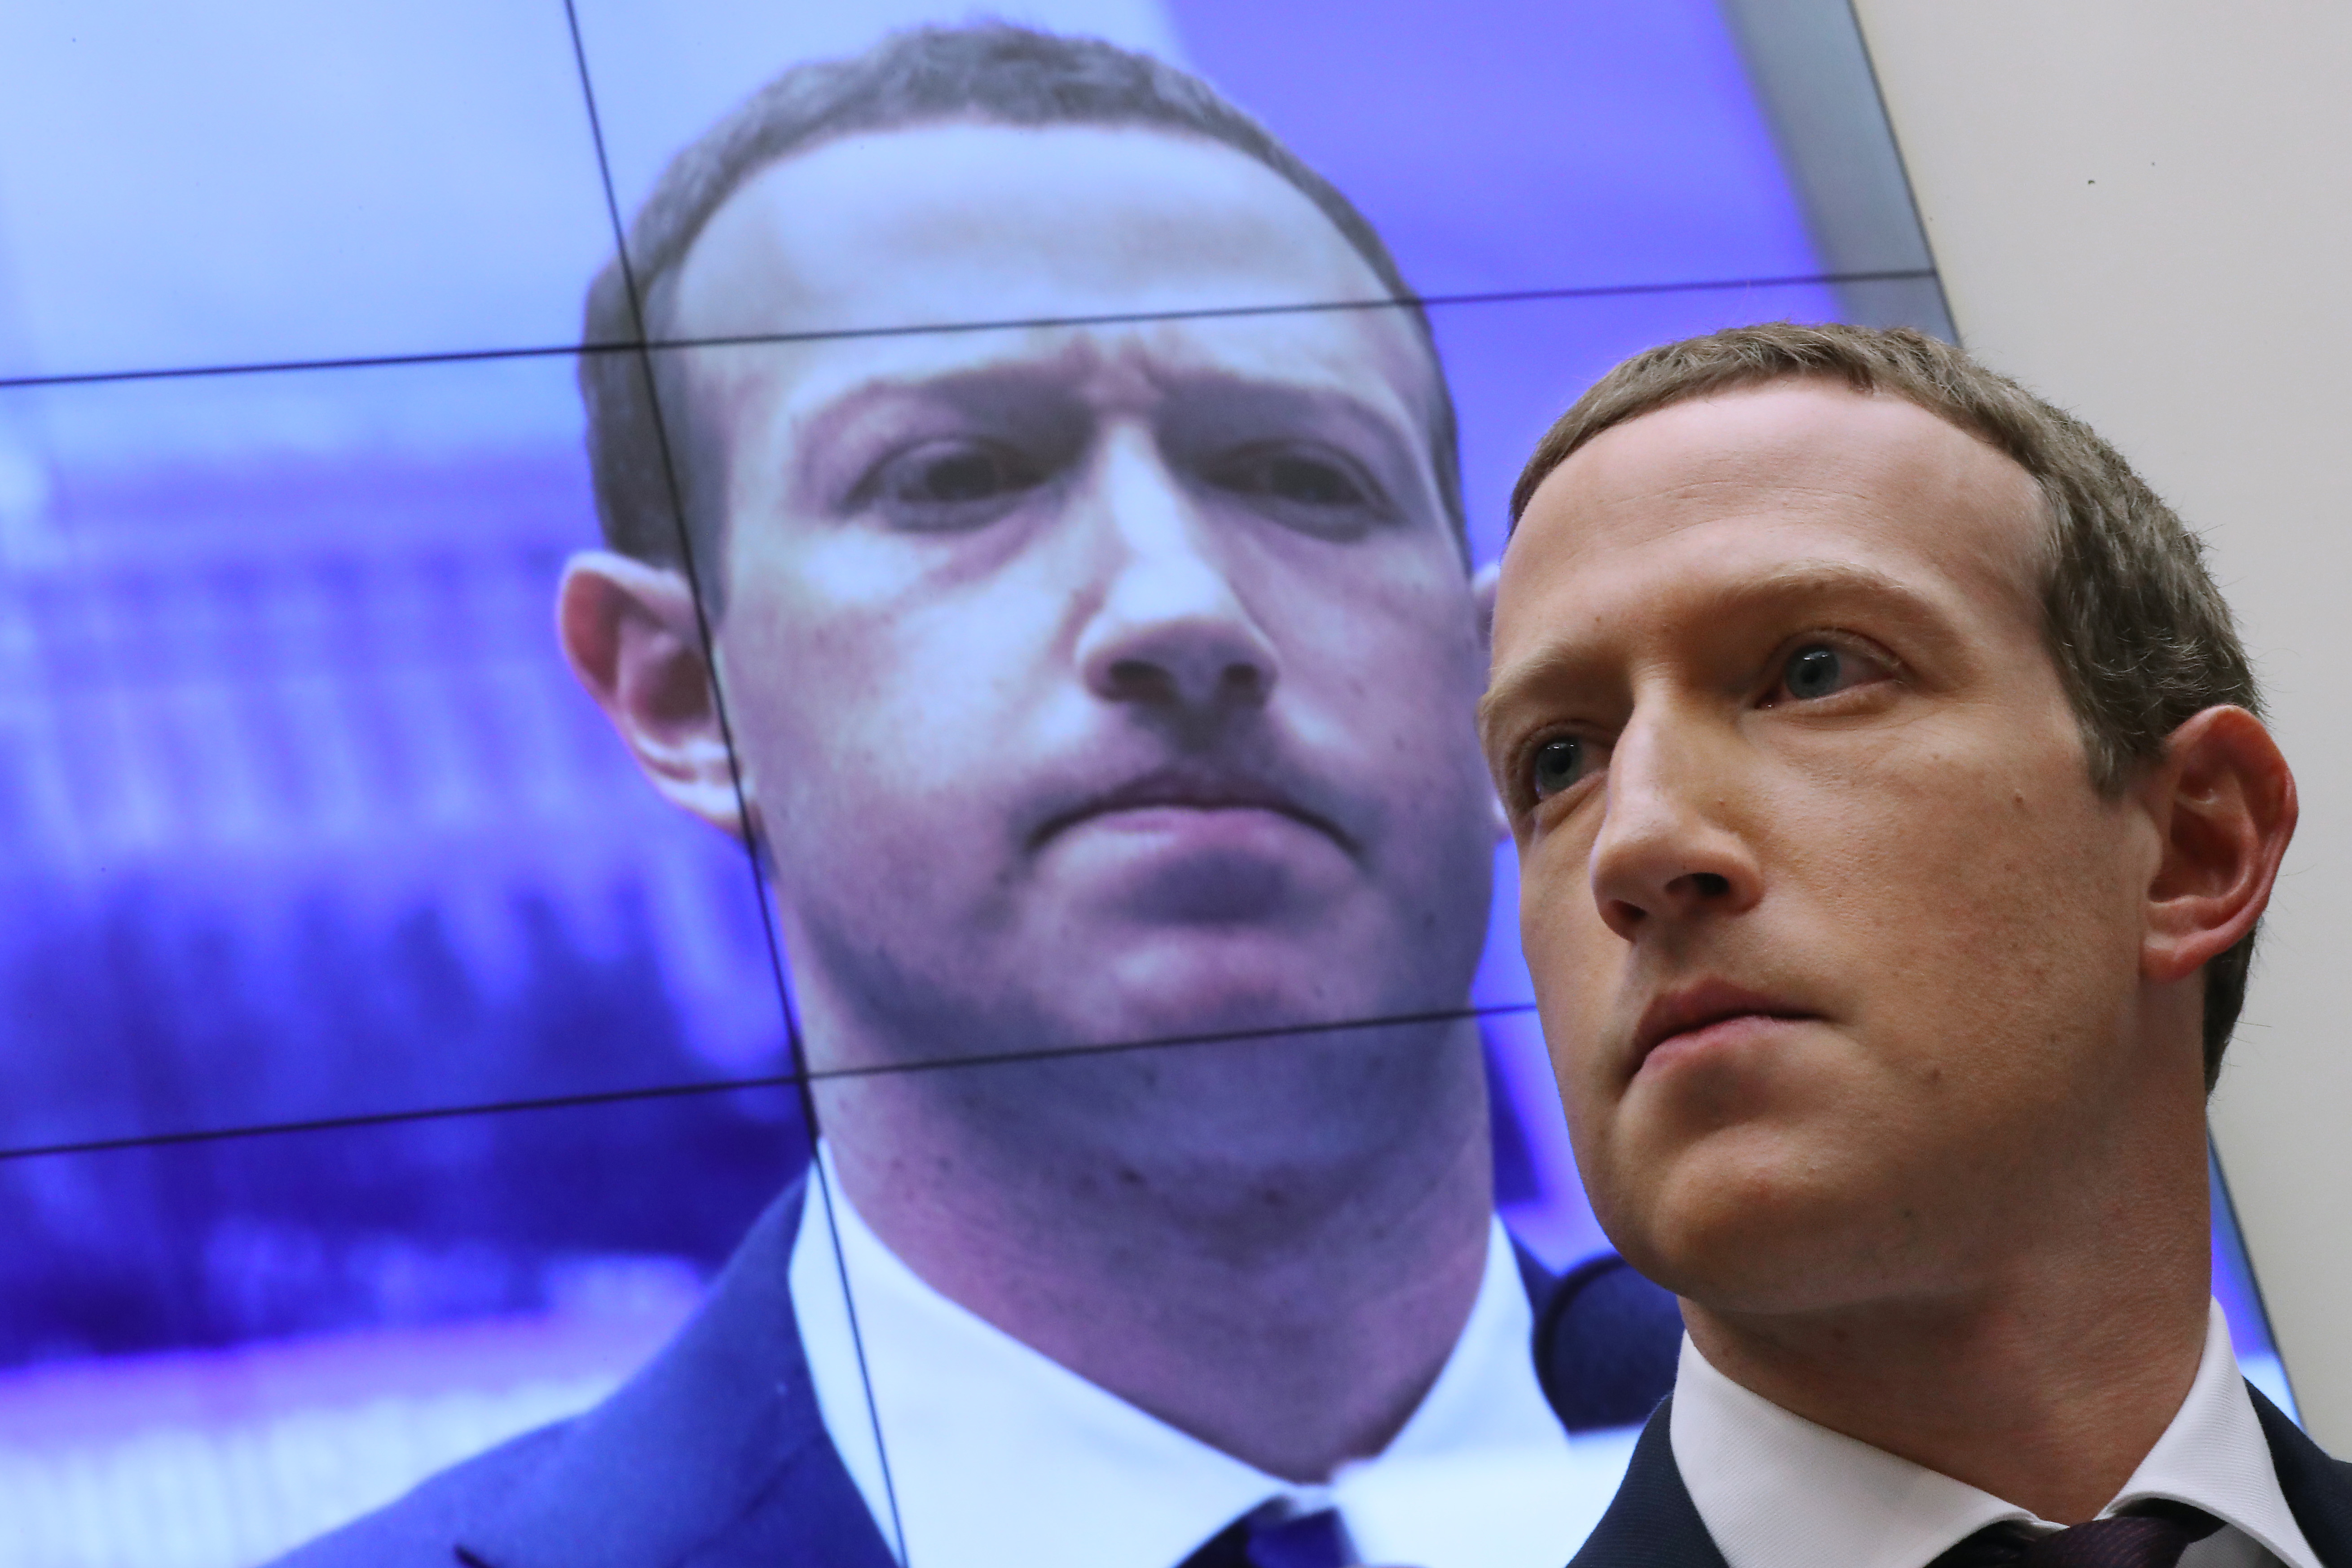 Mark Zuckerberg’s face appearing on a screen behind him.